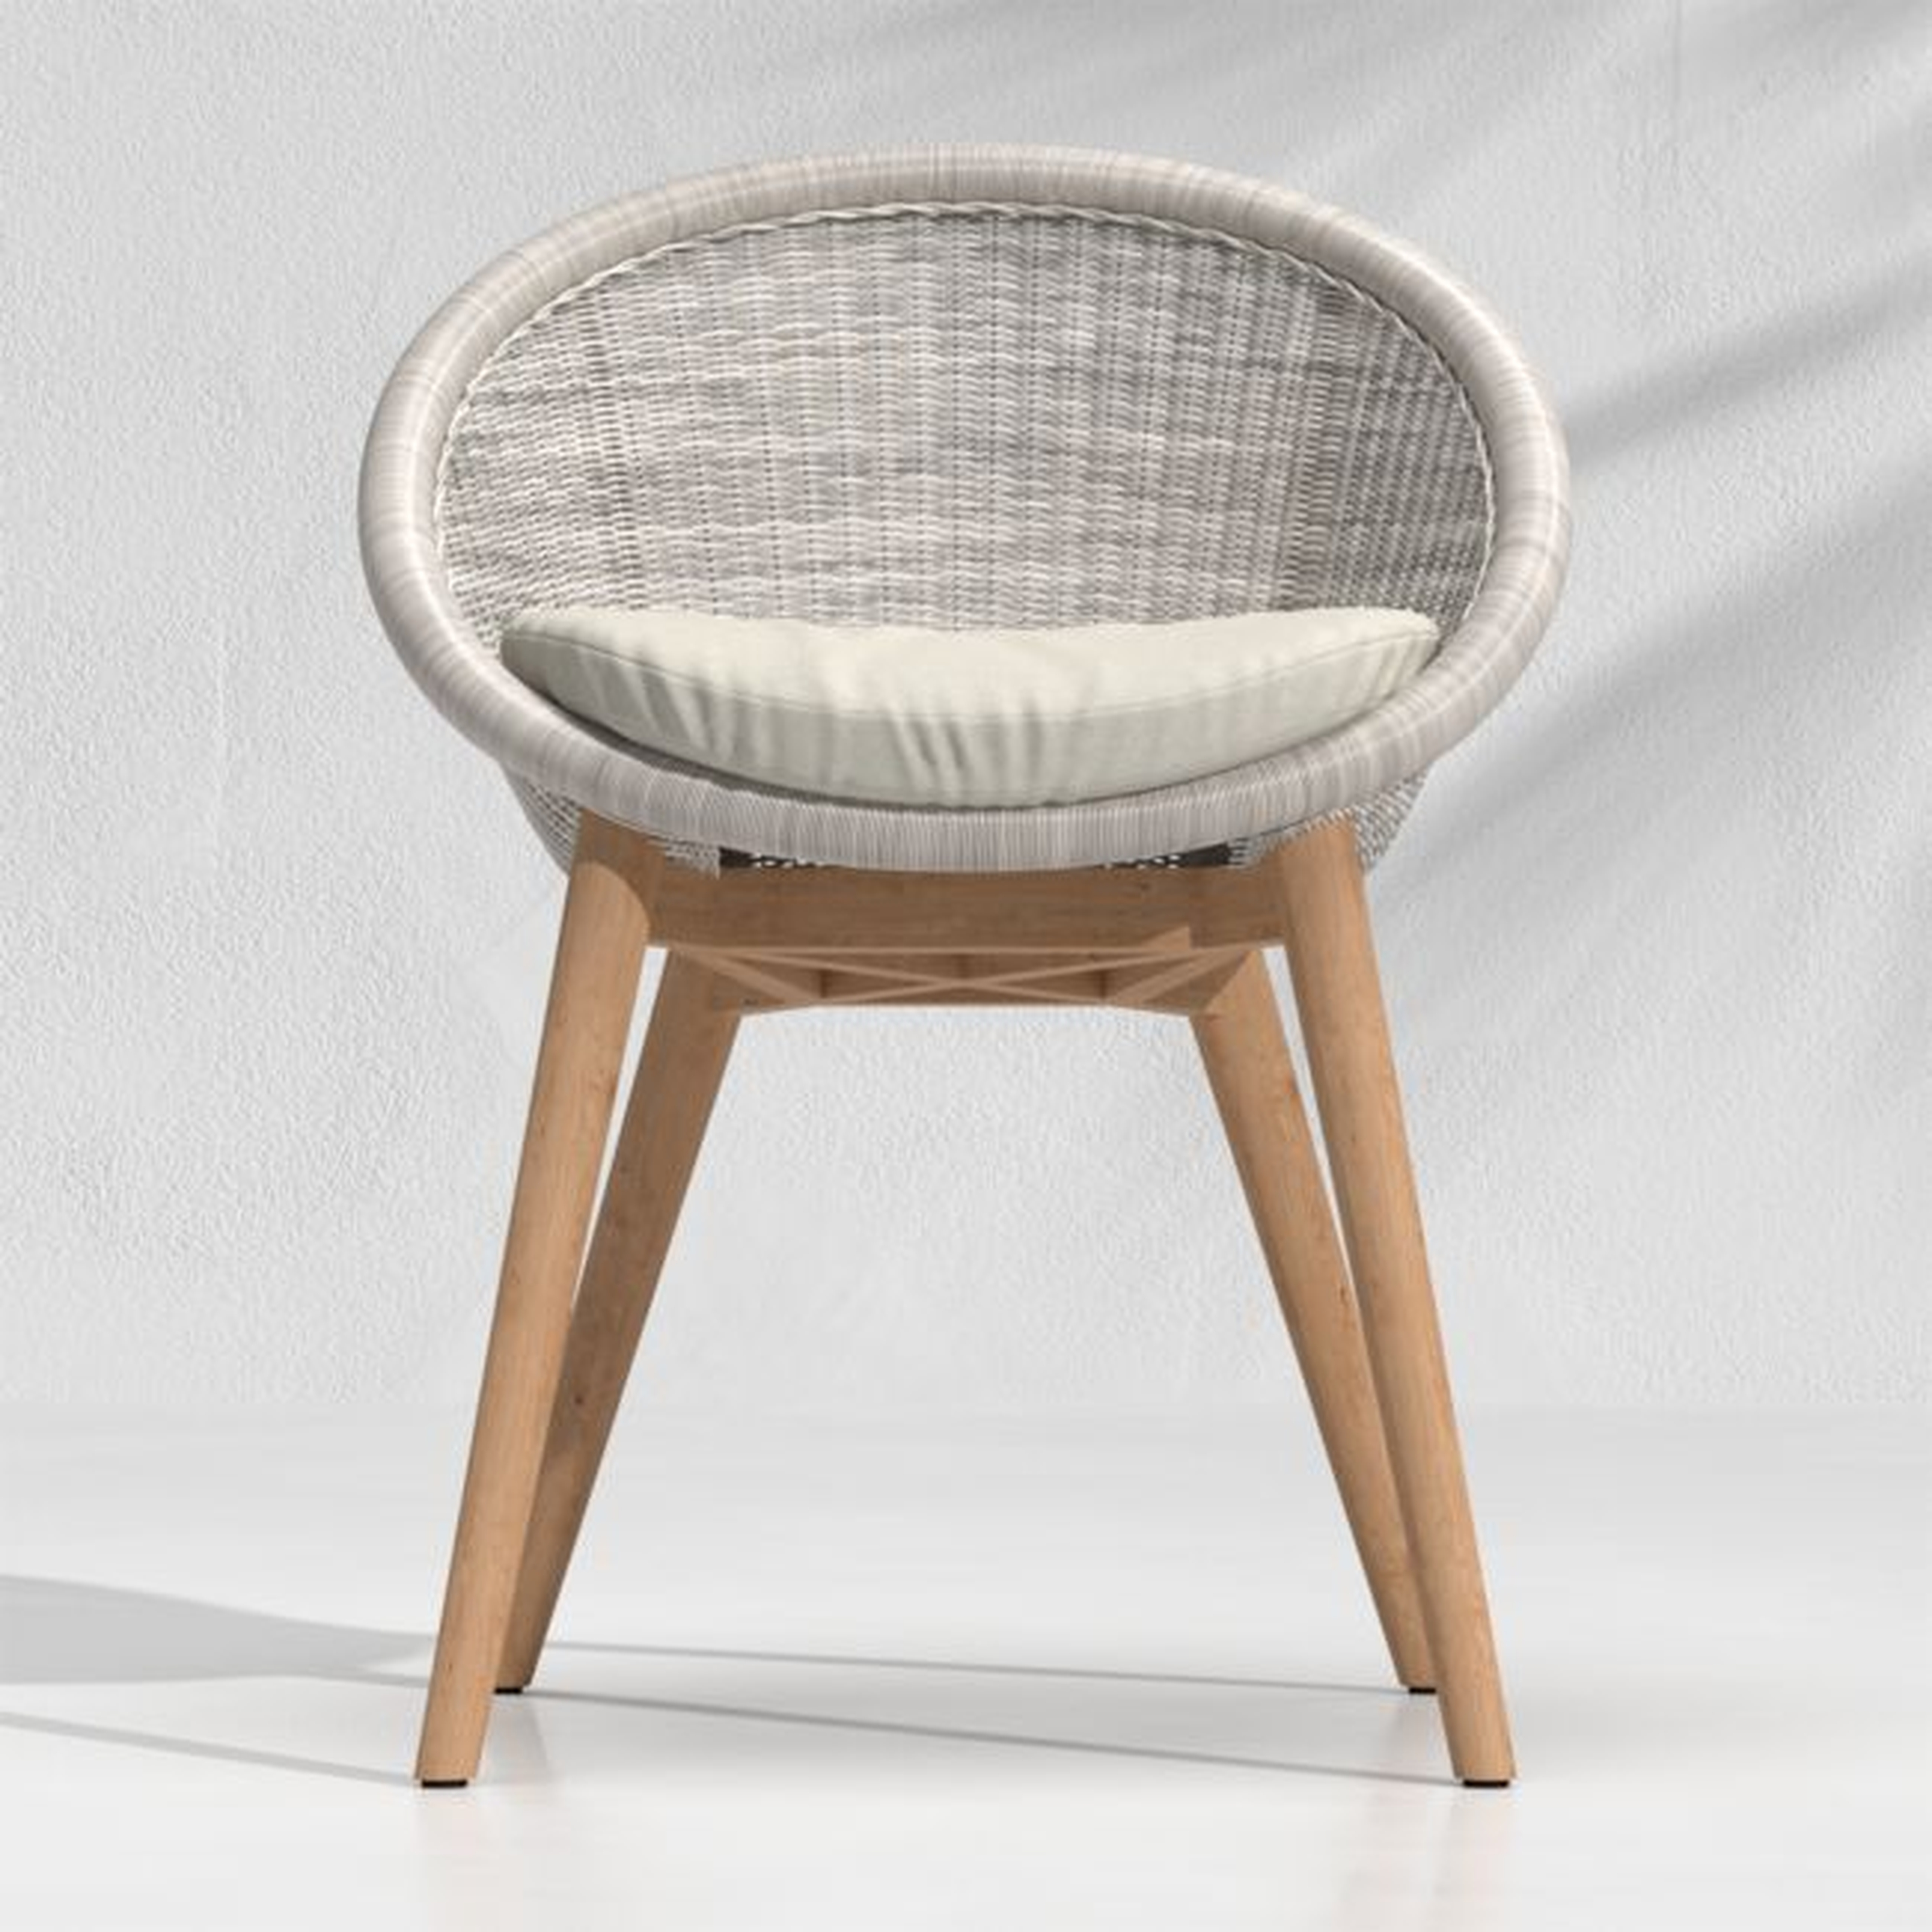 Loon Grey Outdoor Dining Chair - Crate and Barrel